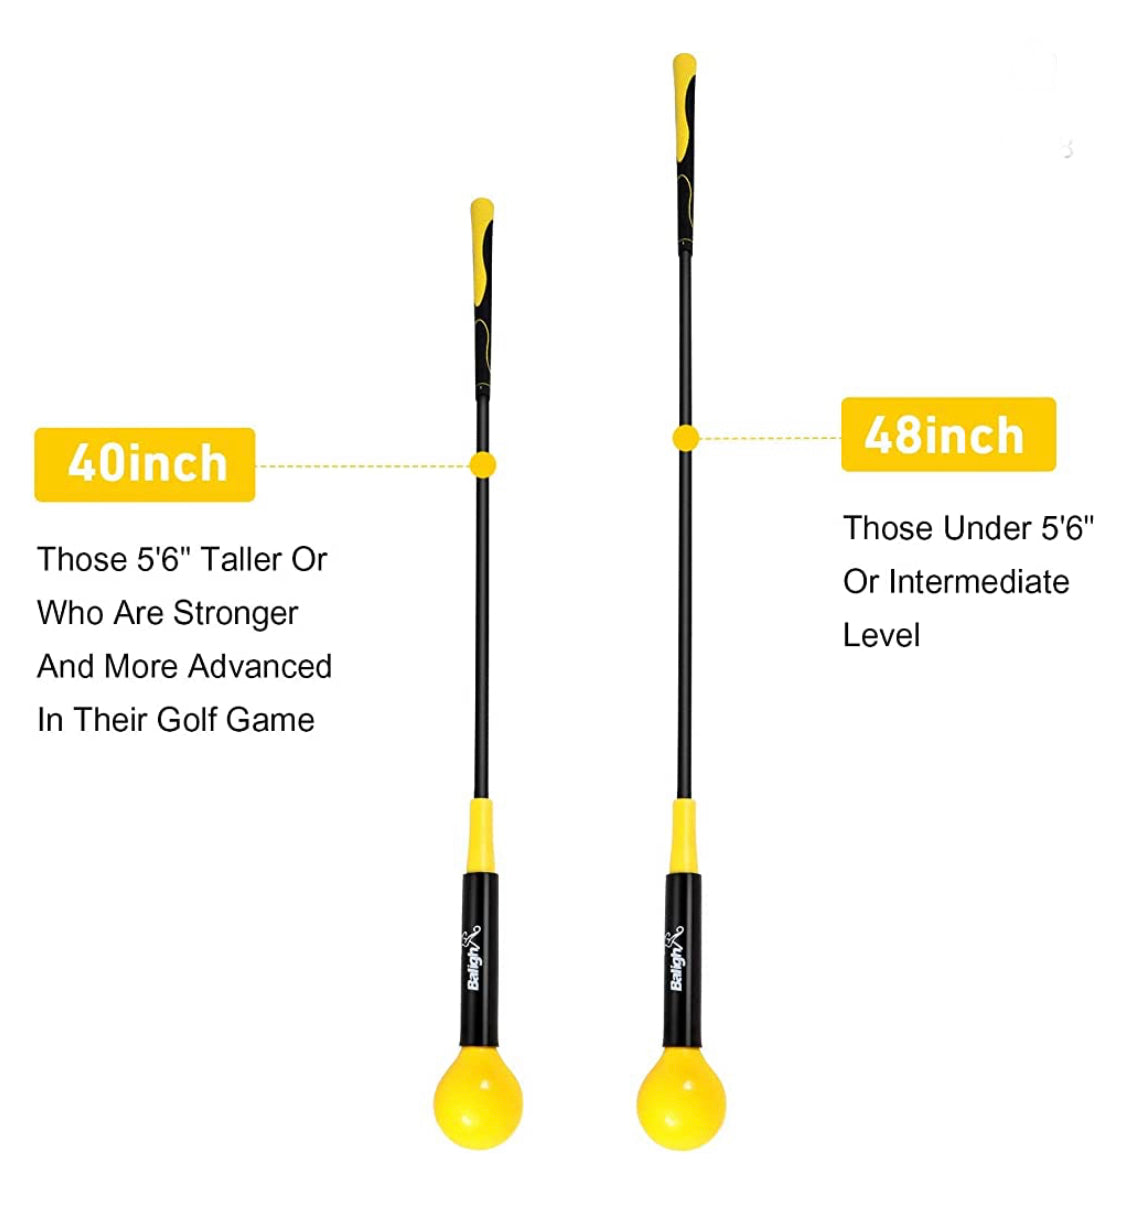 Balight Golf Swing Trainer Aid and Correction for Strength Grip Tempo & Flexibility Training Suit for Indoor Practice Chipping Hitting Golf Accessories